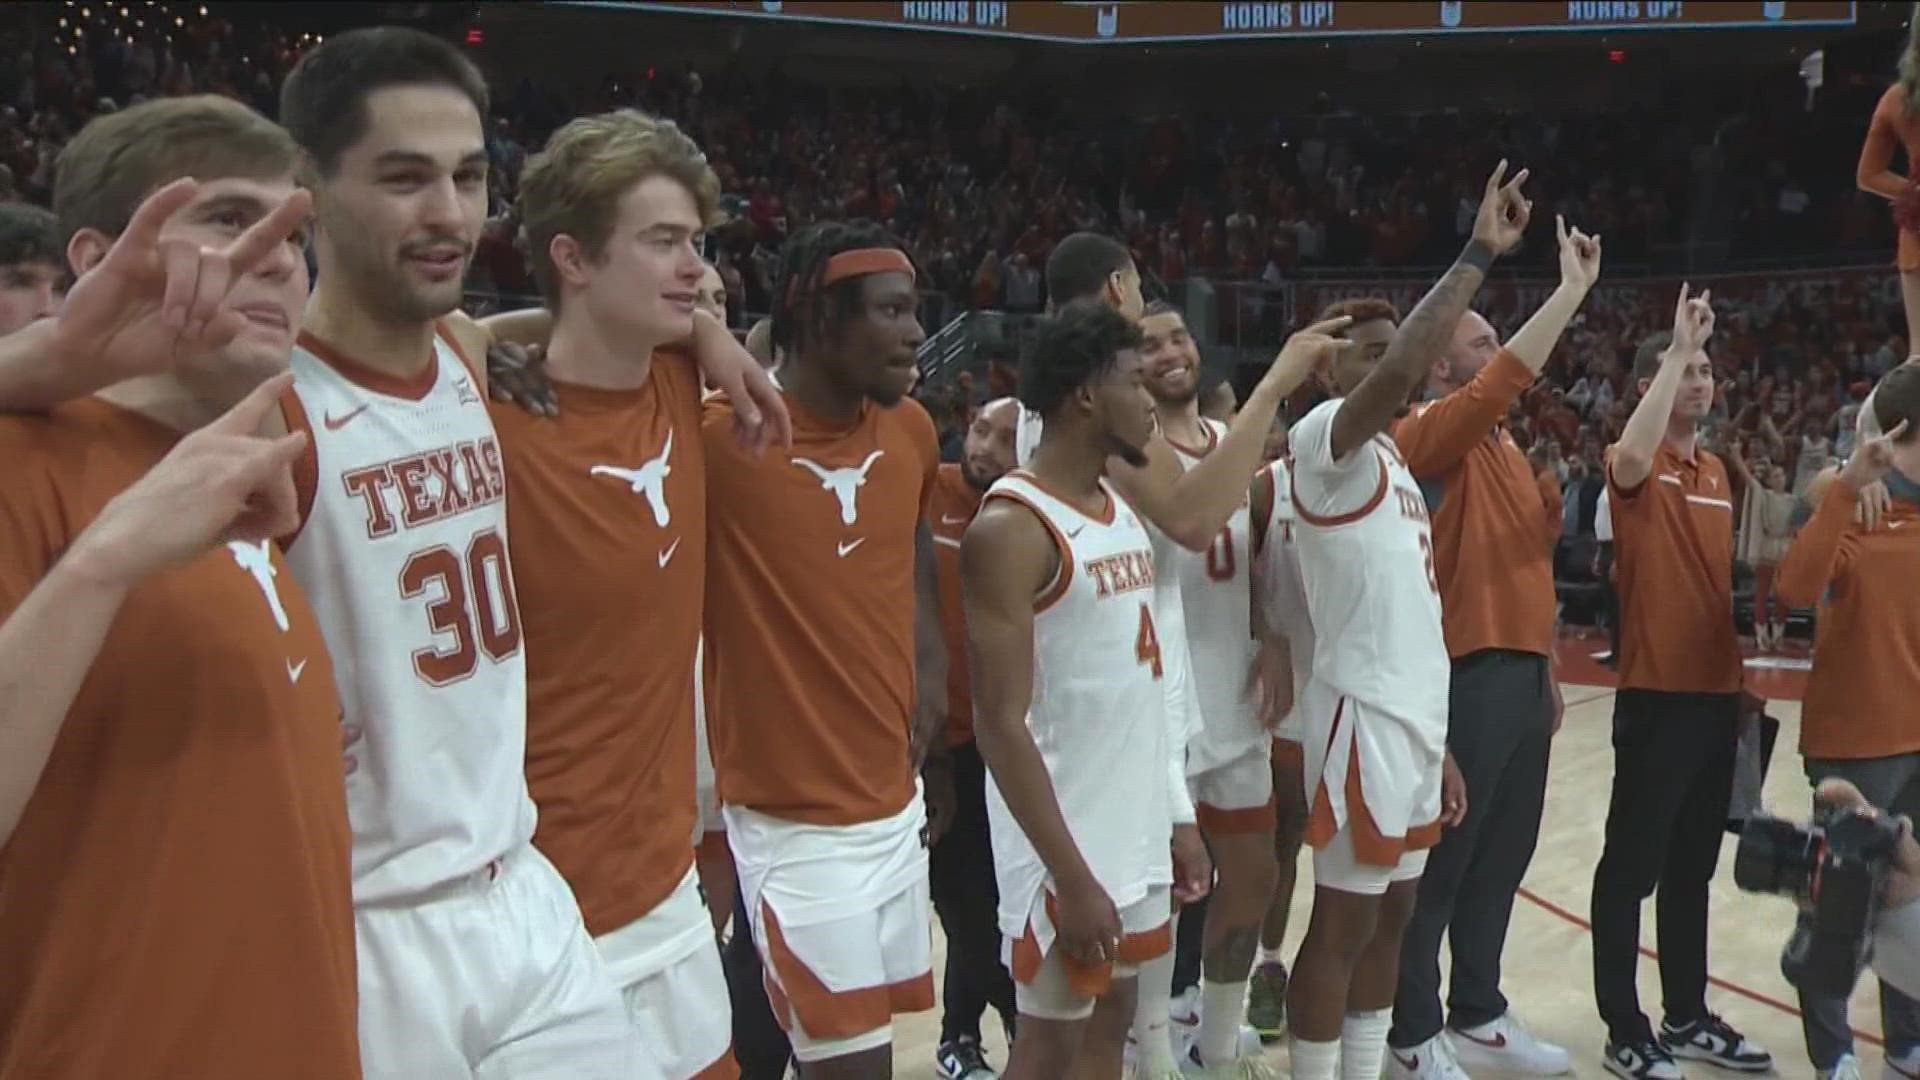 Brock Cunningham delivered yet another timely 3 in Texas's win over the Red Raiders. And that's not the first time.